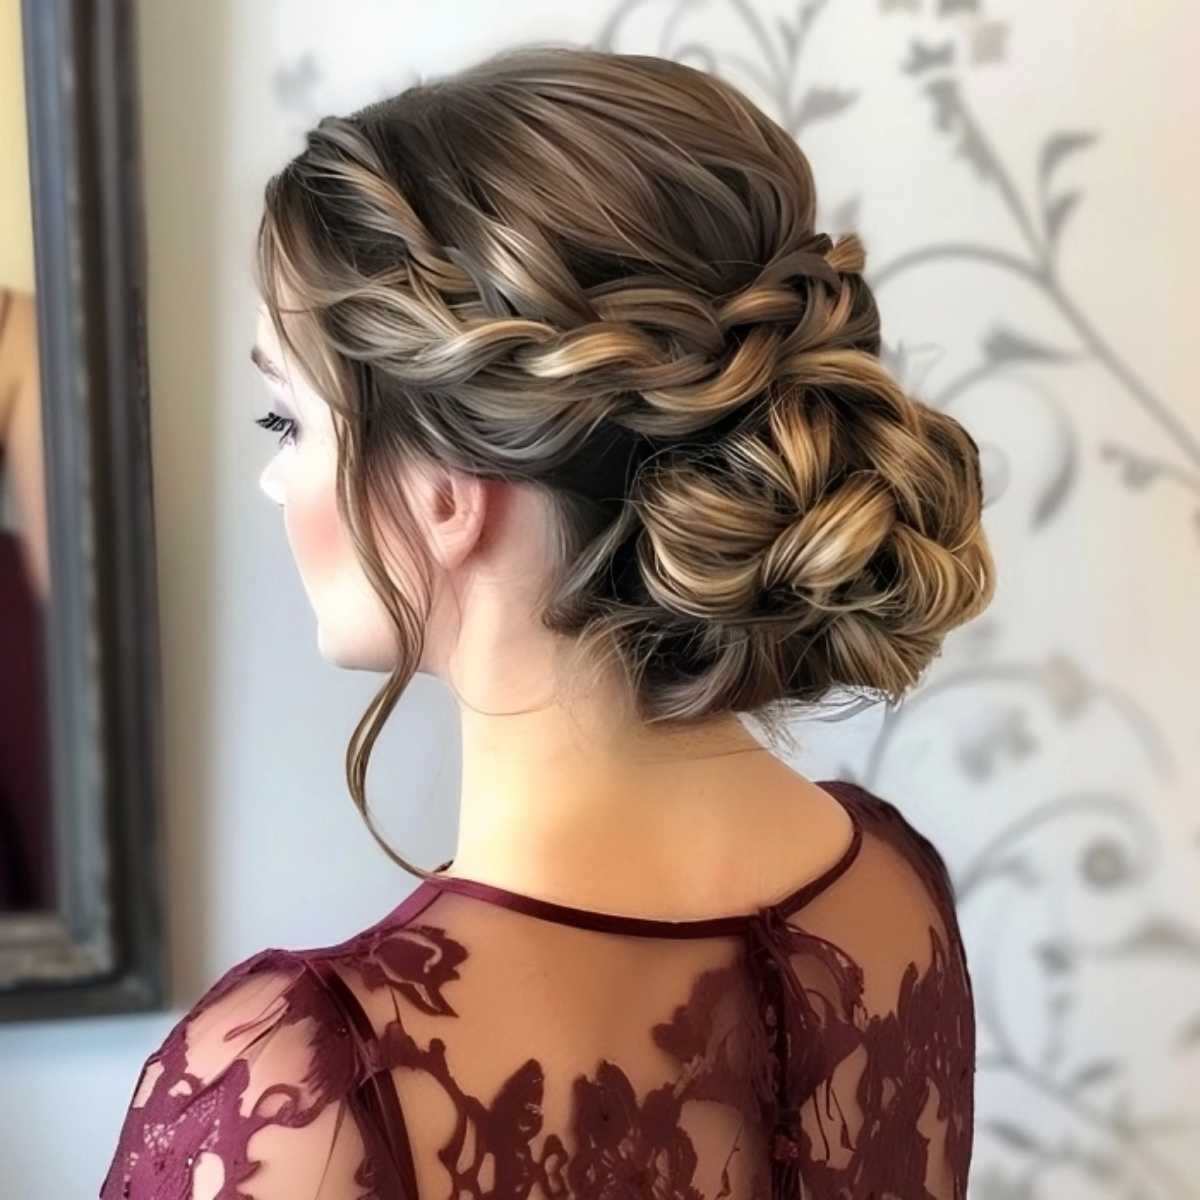 A braided updo for prom